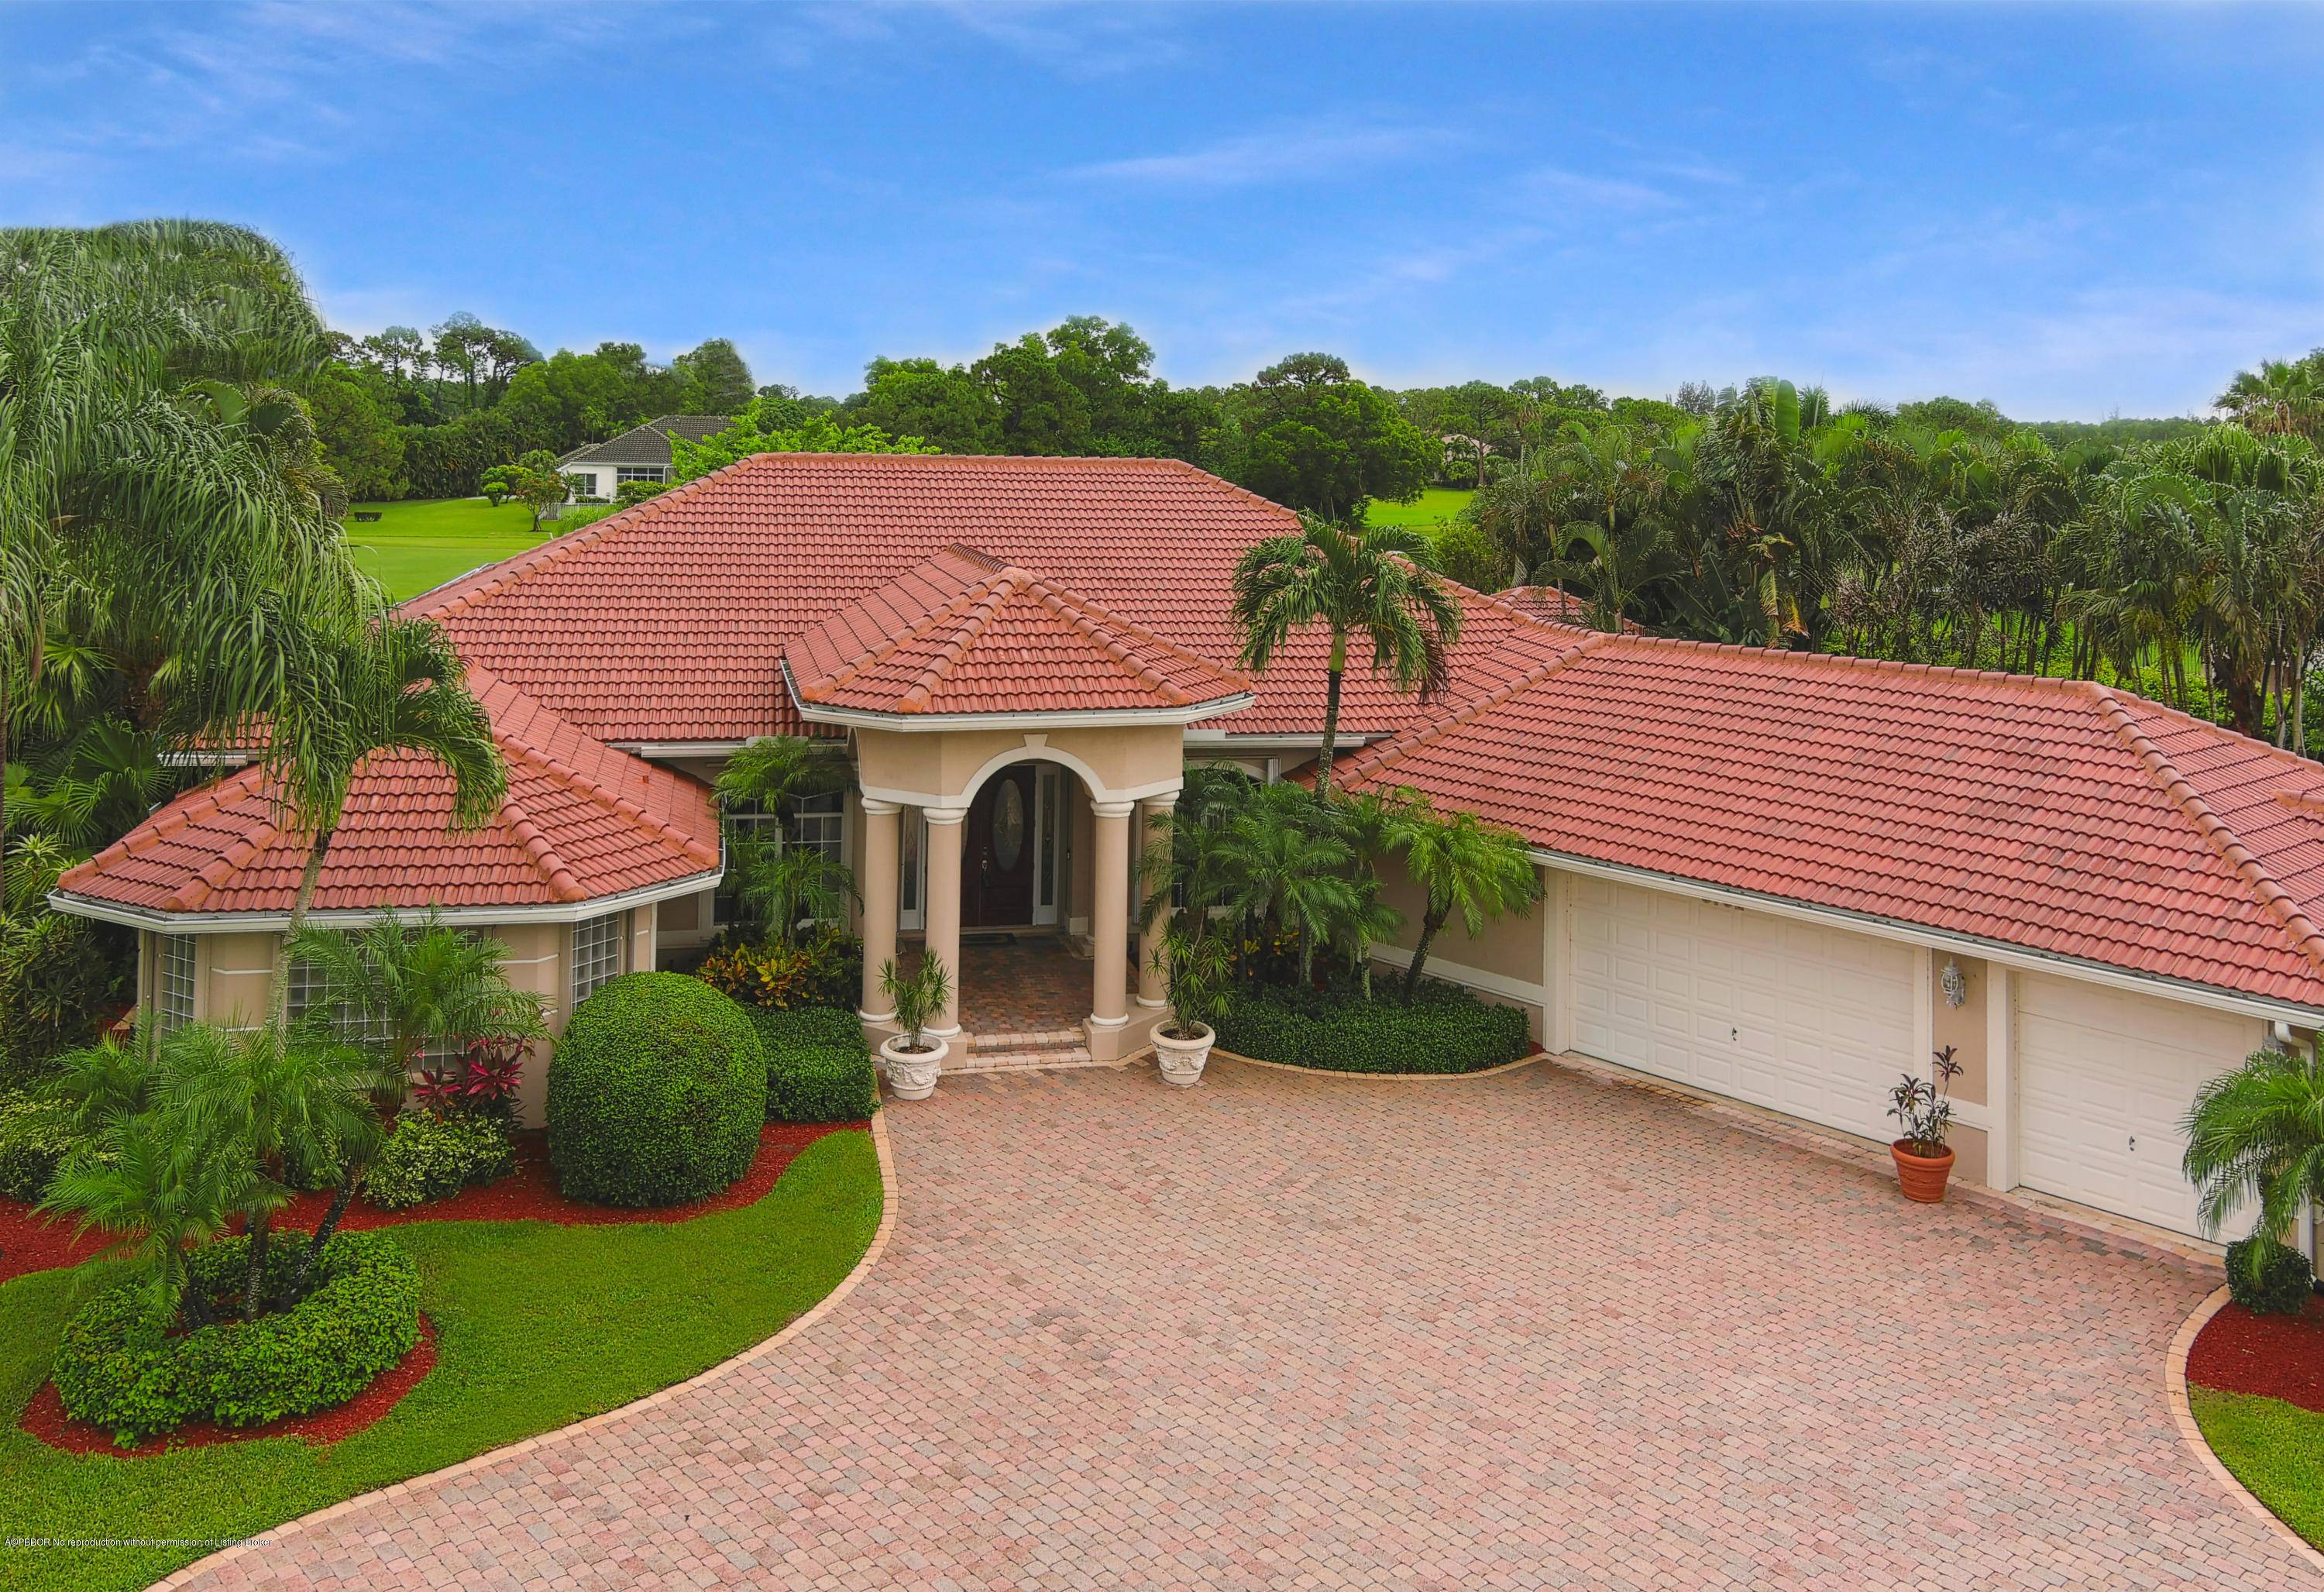 Located in the Manned Gated Golf Course Non Equity Membership Community of Bay Hill Estates, this Residence has more to Offer One Lucky Buyer than any other House in this ...